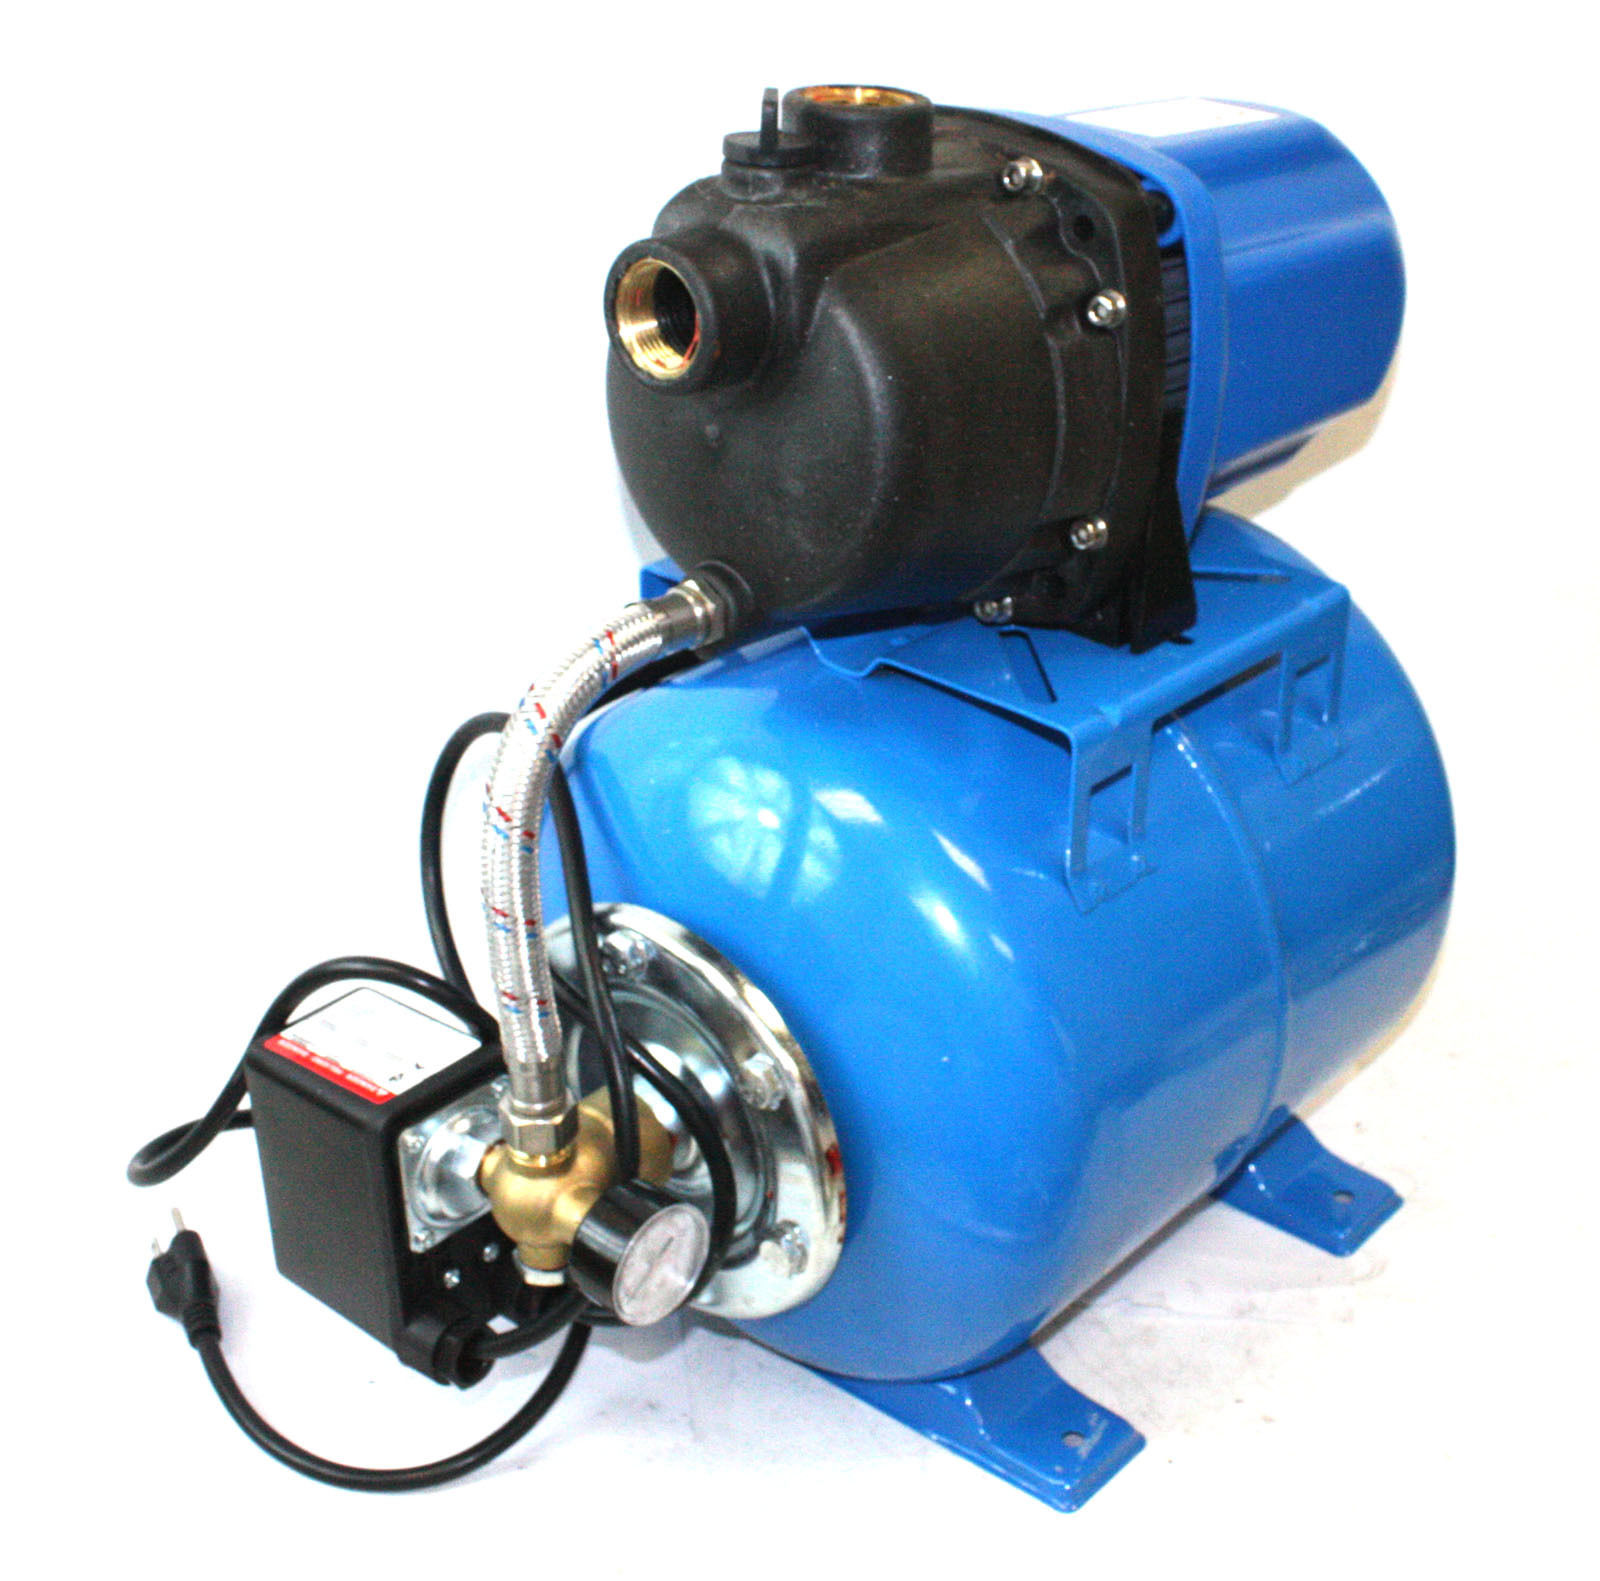 1.6 HP Electric Shallow Well Pressurized Home Irrigation Garden Water Pump 